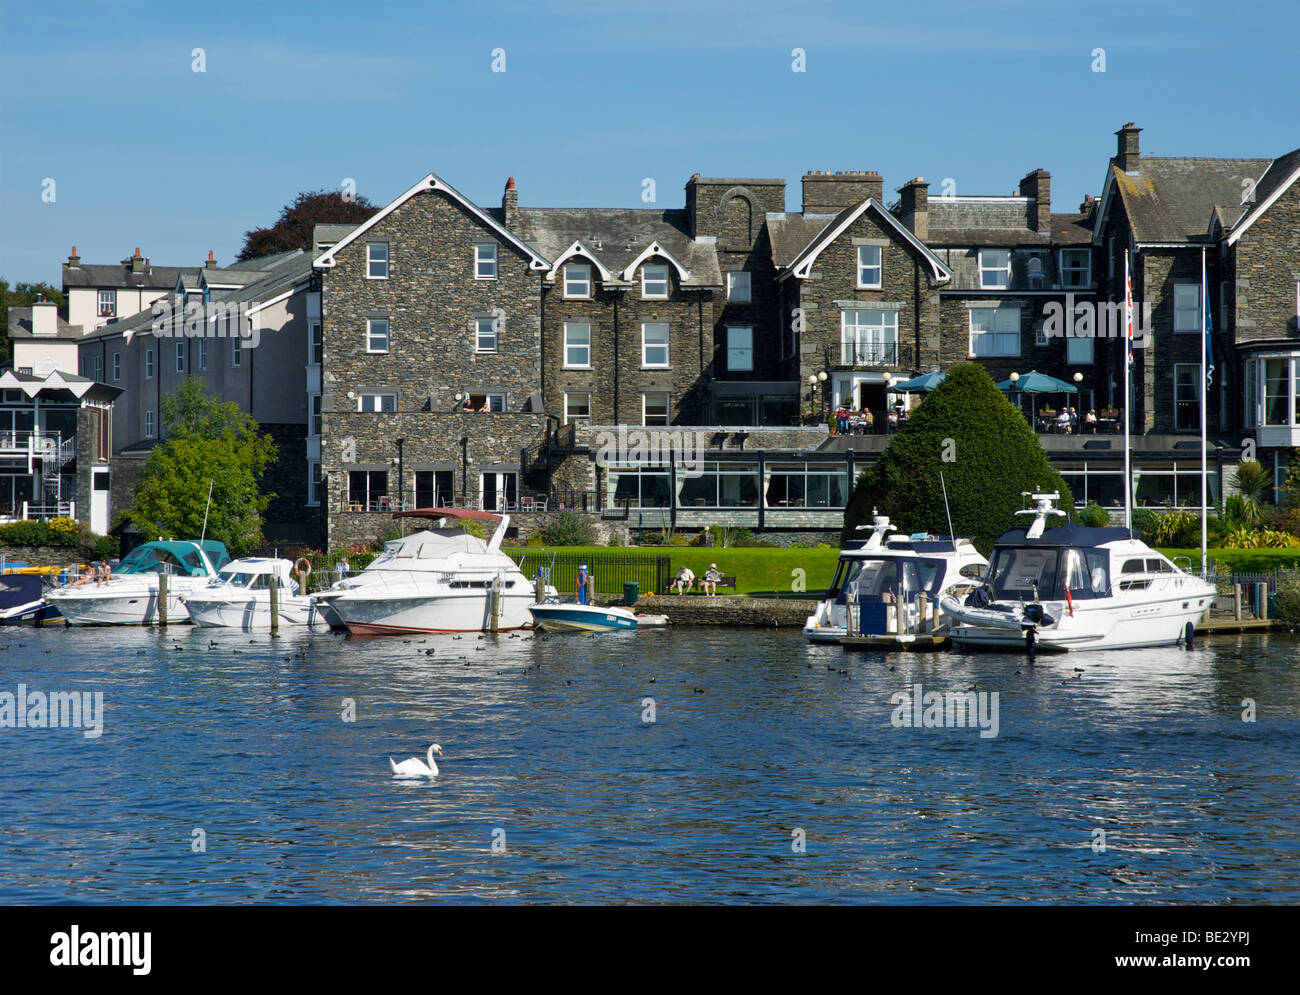 The Old England Hotel, overlooking Lake Windermere, Bowness, Lake District National Park, Cumbria, England UK Stock Photo